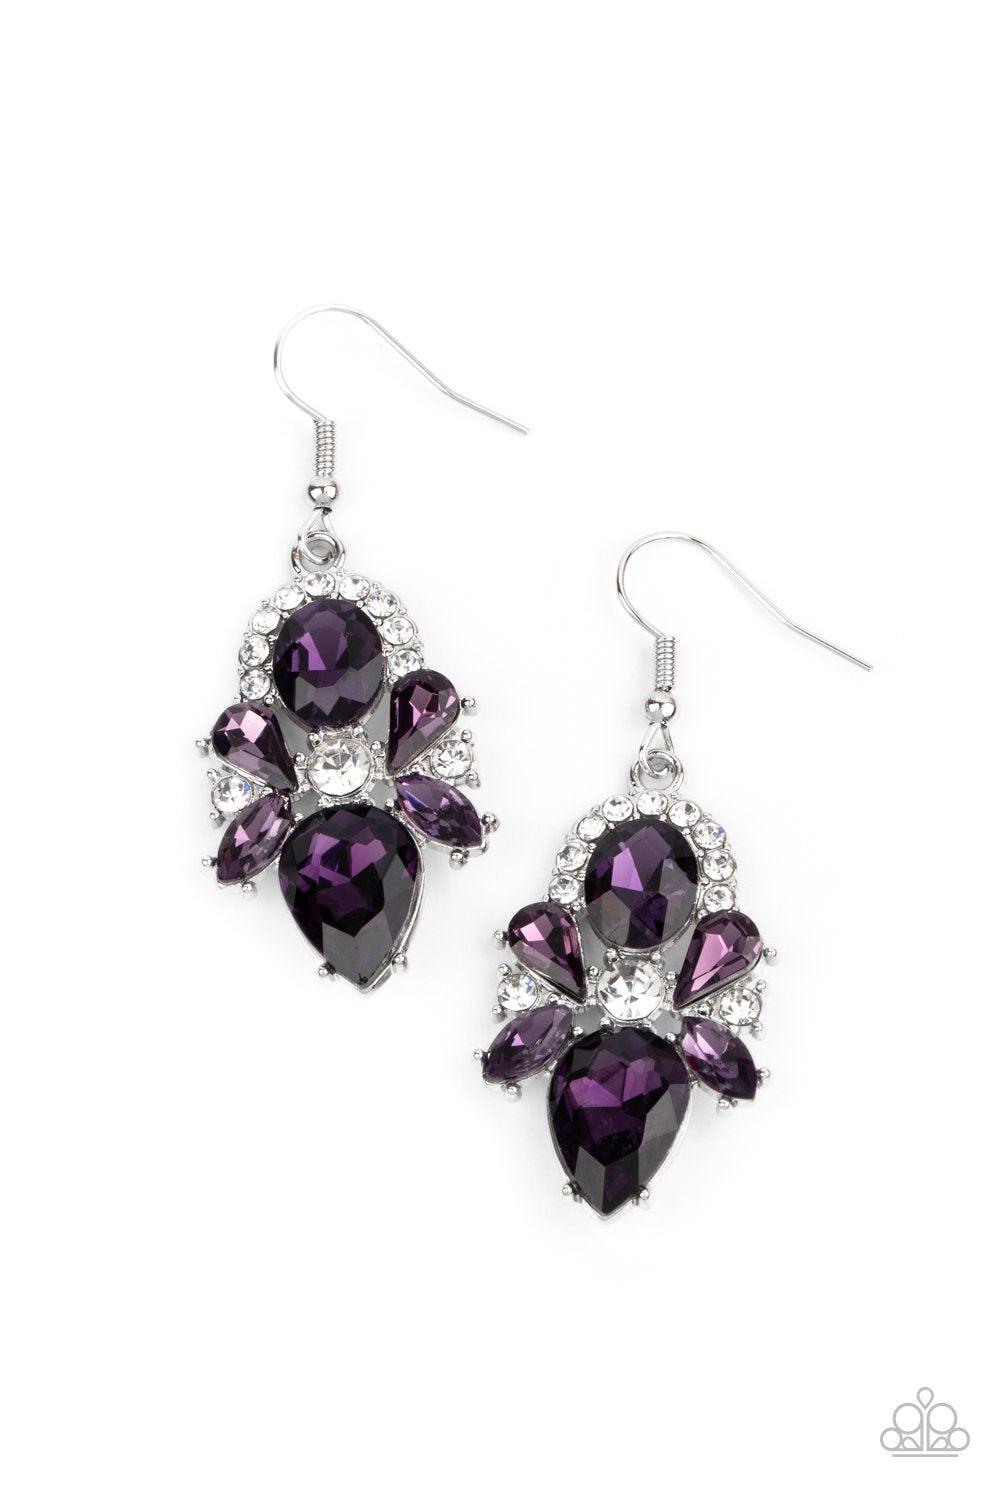 Stunning Starlet Purple and White Rhinestone Earrings - Paparazzi Accessories- lightbox - CarasShop.com - $5 Jewelry by Cara Jewels